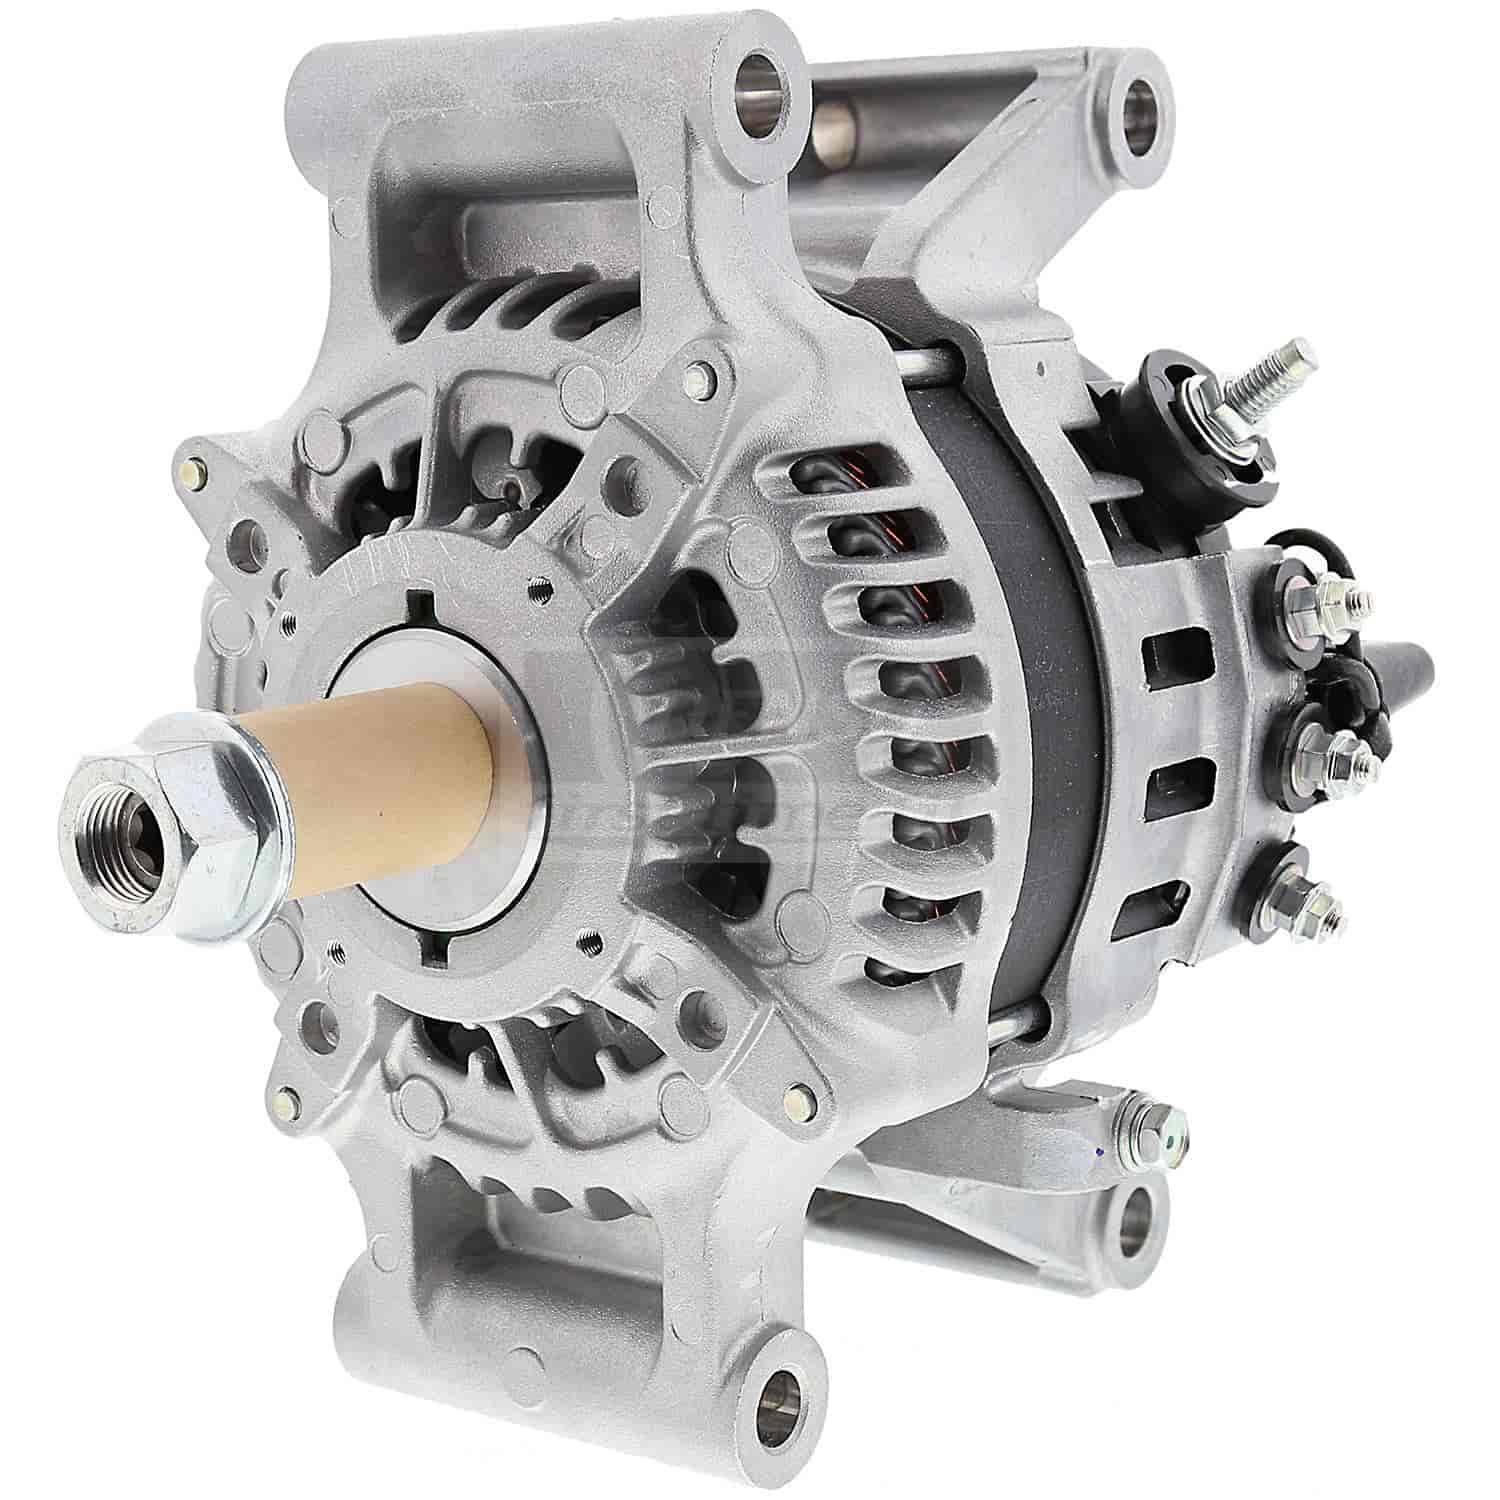 First Time Fit Alternator 1995-2000 Chrysler, Plymouth, Dodge